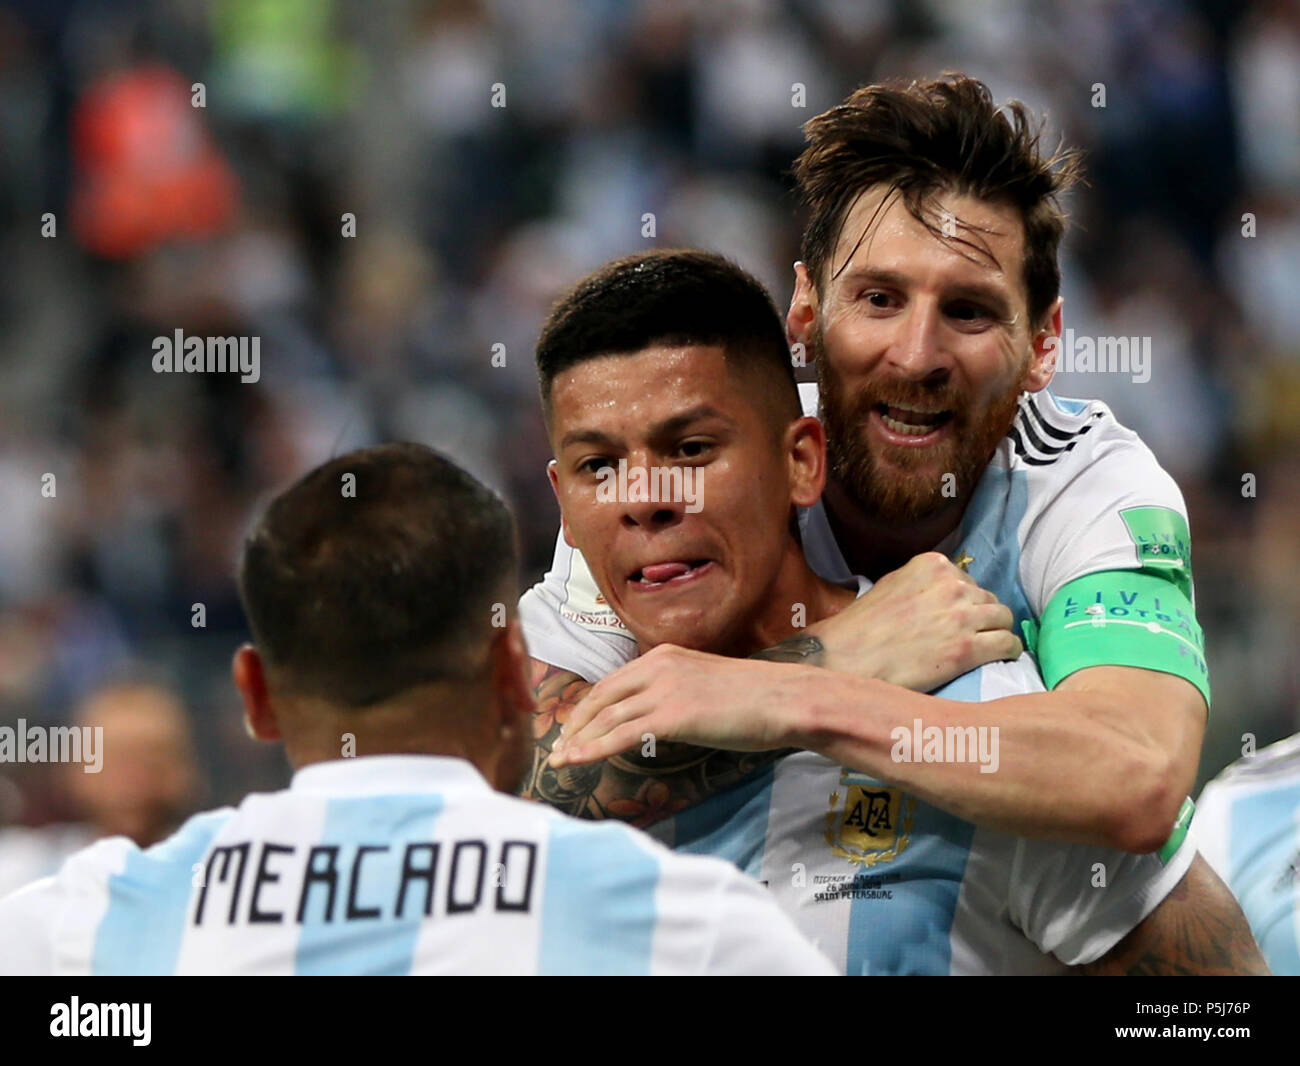 Moscow, Russia. 26th June, 2018. Soccer, World Cup 2018, Preliminary round,  Group D, 3rd game day, Nigeria vs Argentina at the St. Petersburg Stadium:  Argentina's goal scorer Marcos Rojo (C) celebrates his